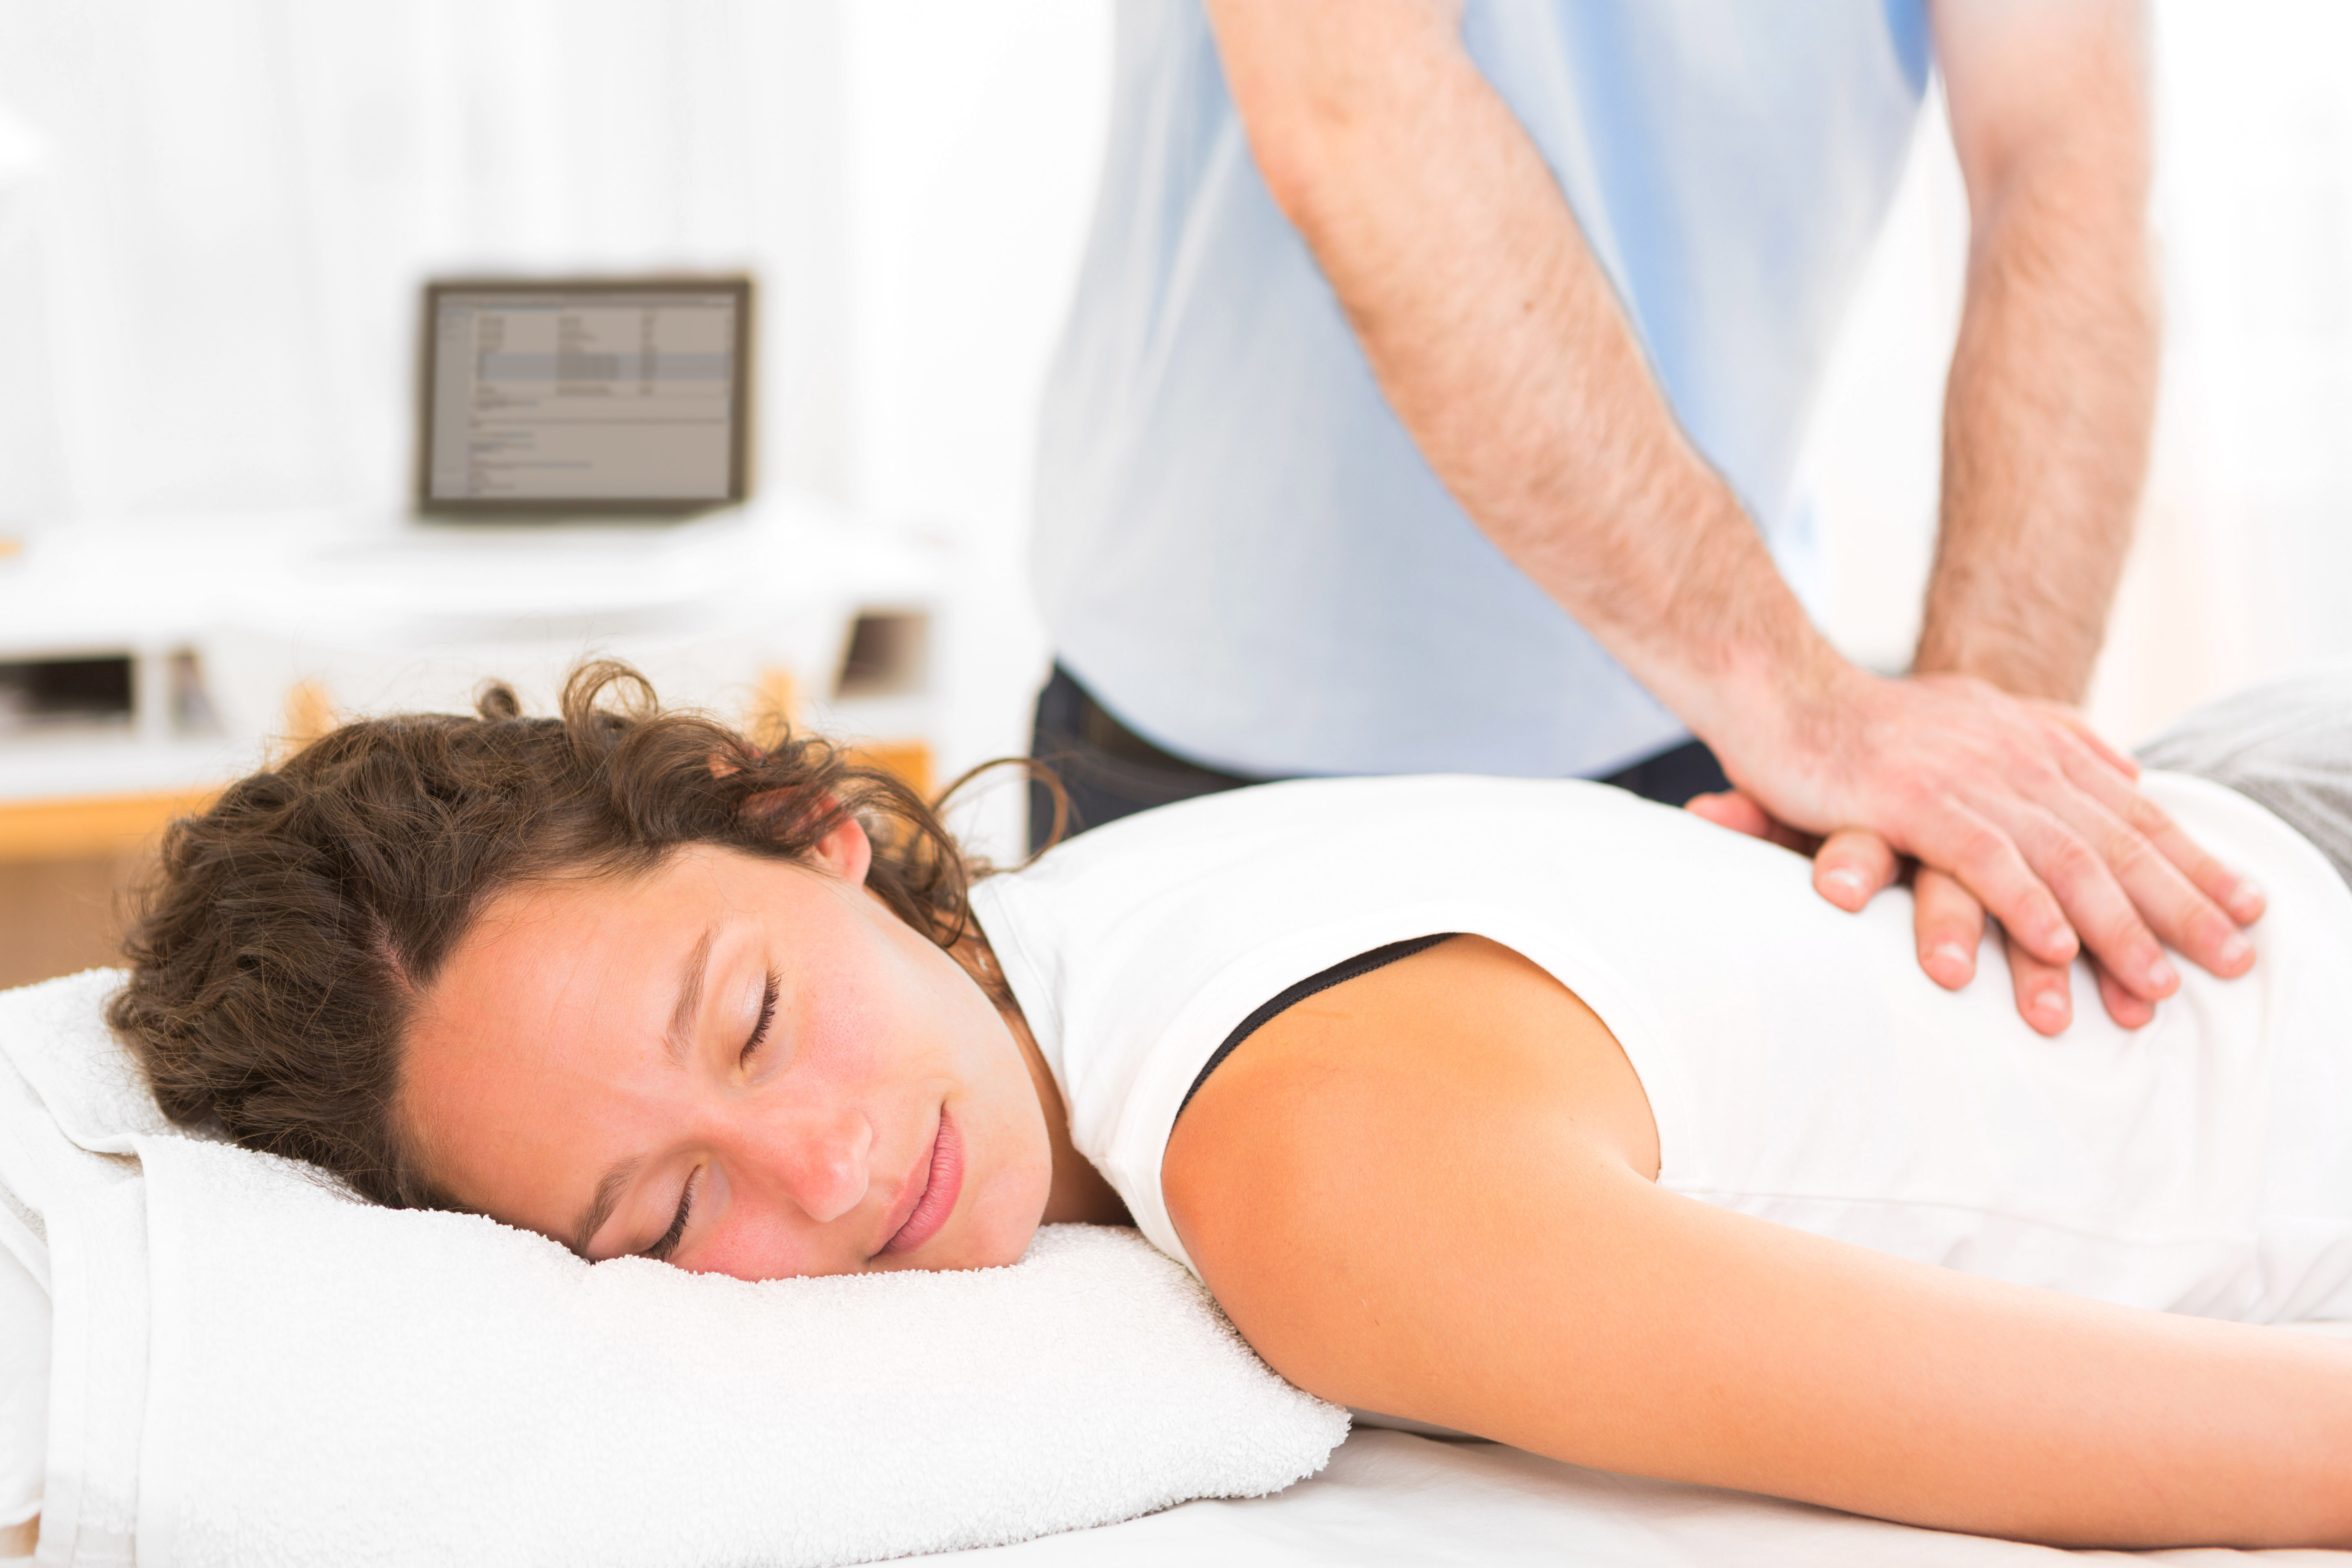 Thriving Chiropractic Practice Available in East Tennessee